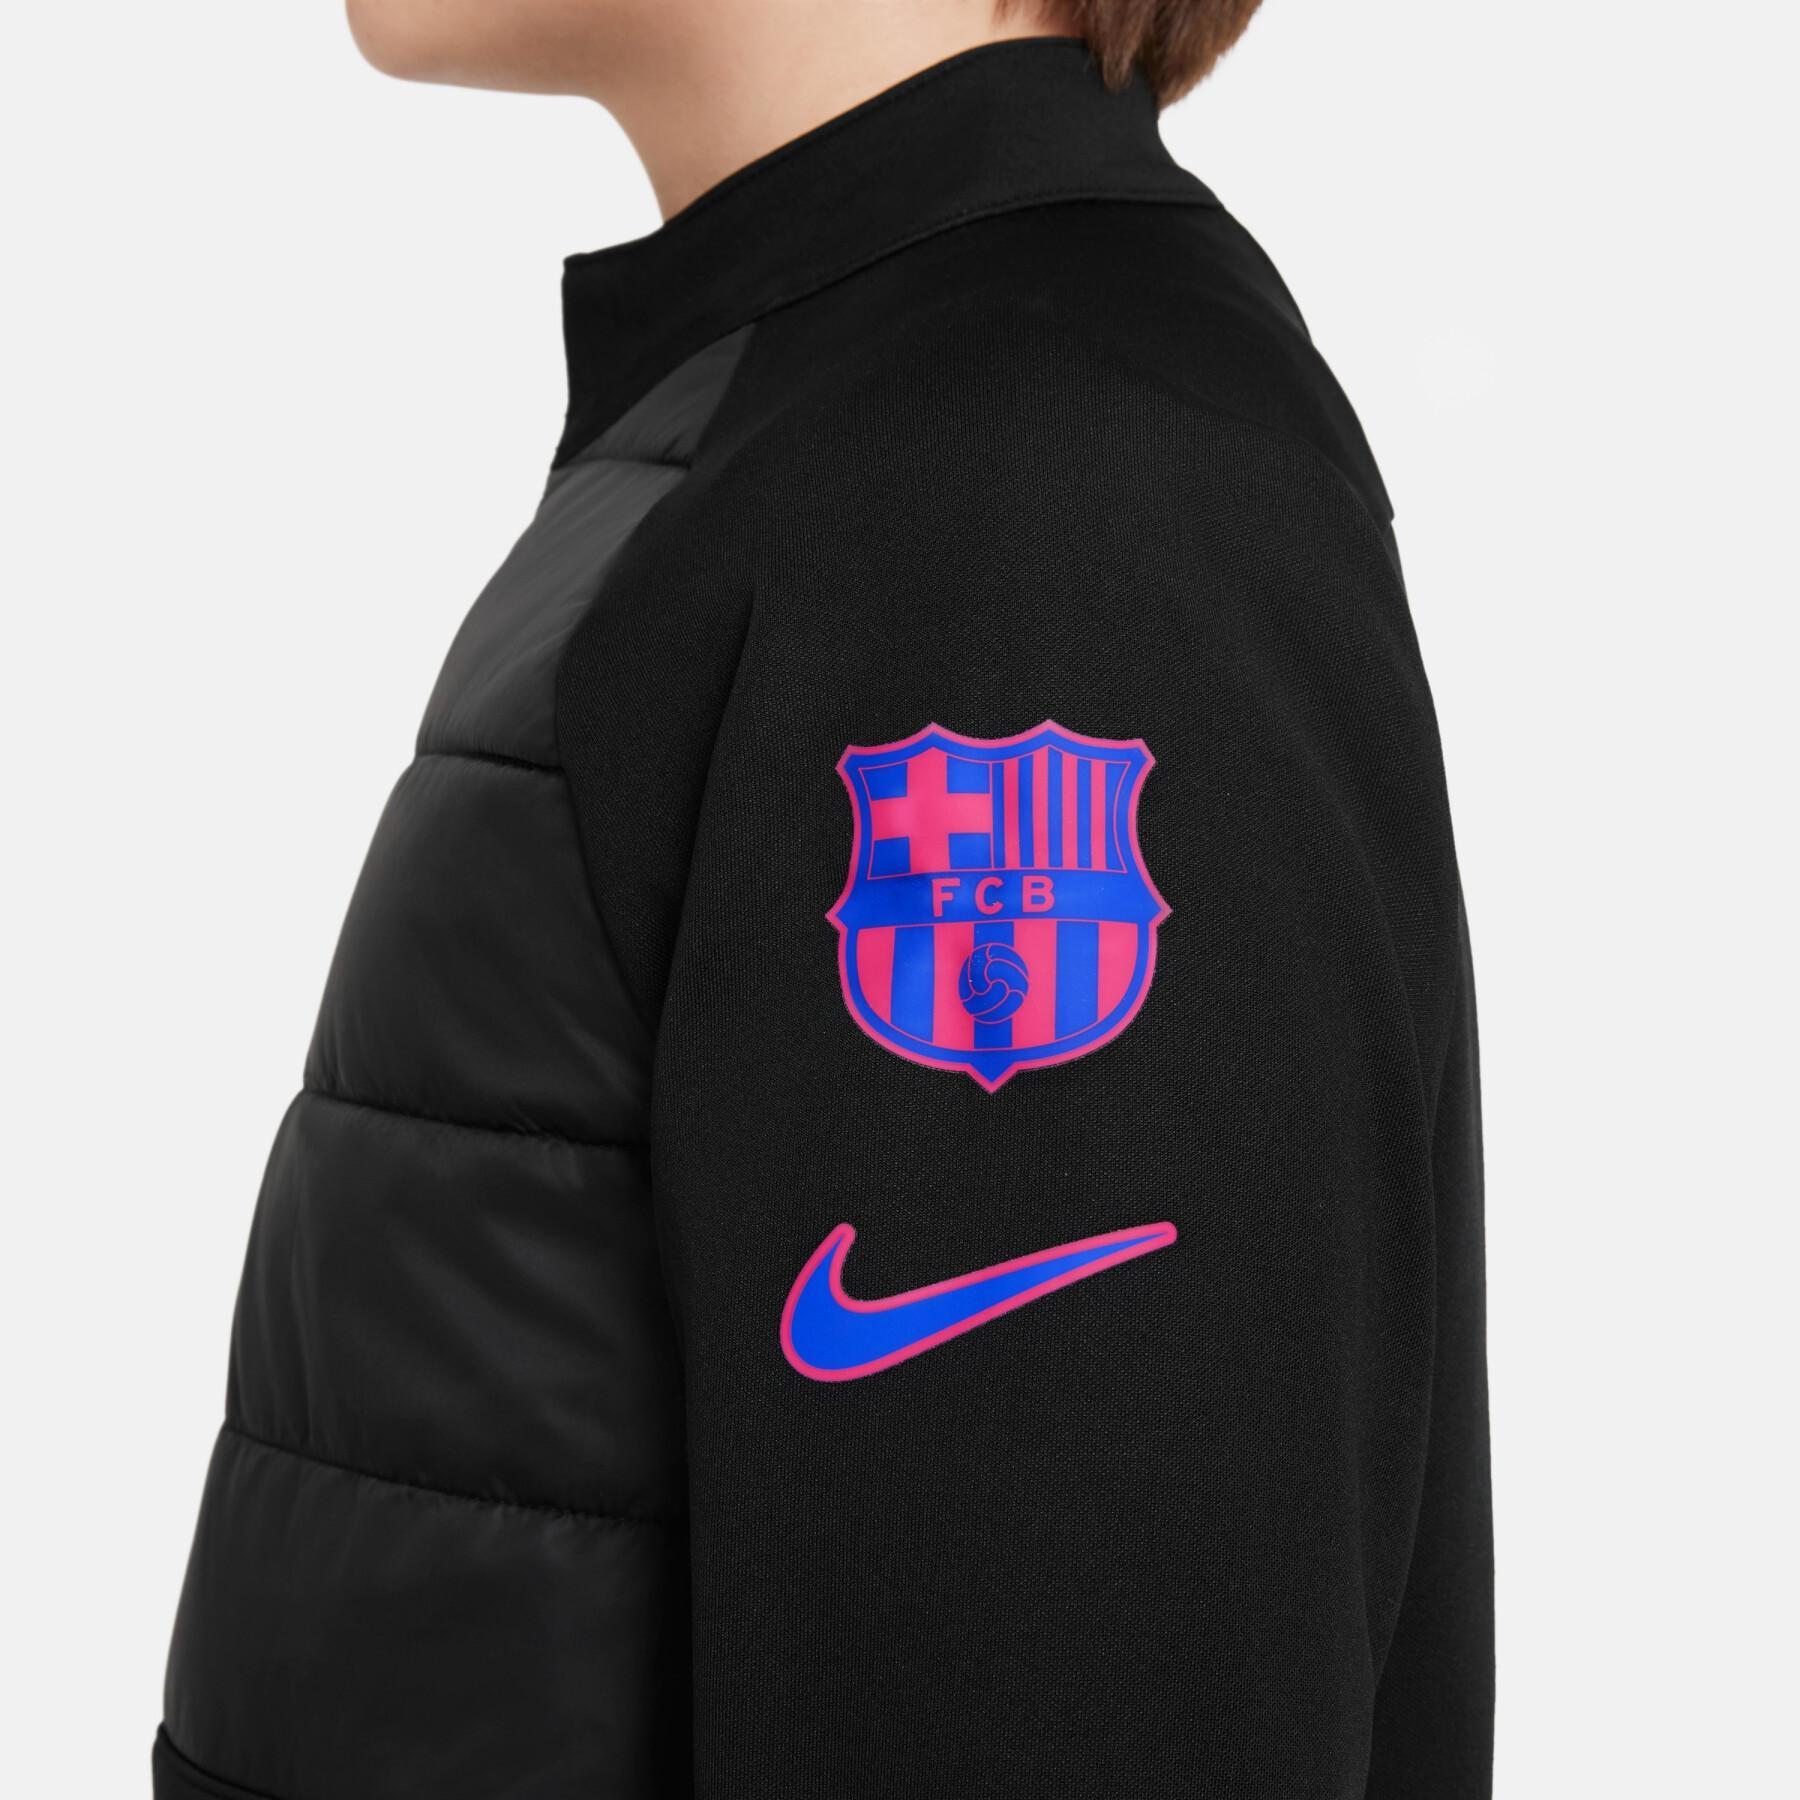 Maillot enfant FC Barcelone tf acdpr driltop ww cl